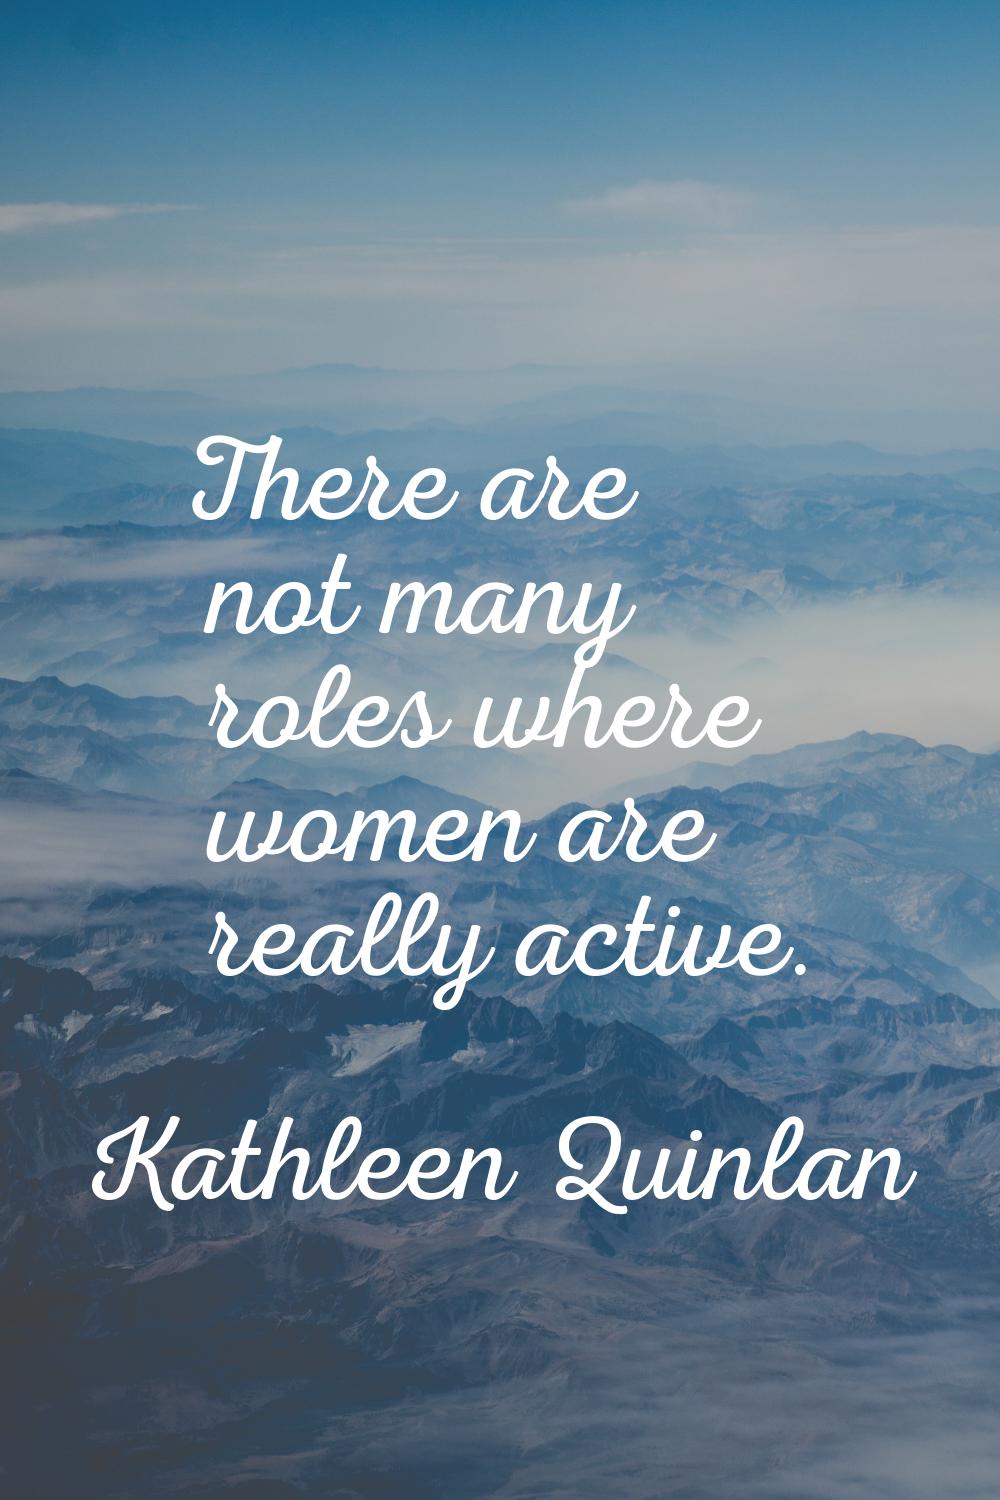 There are not many roles where women are really active.